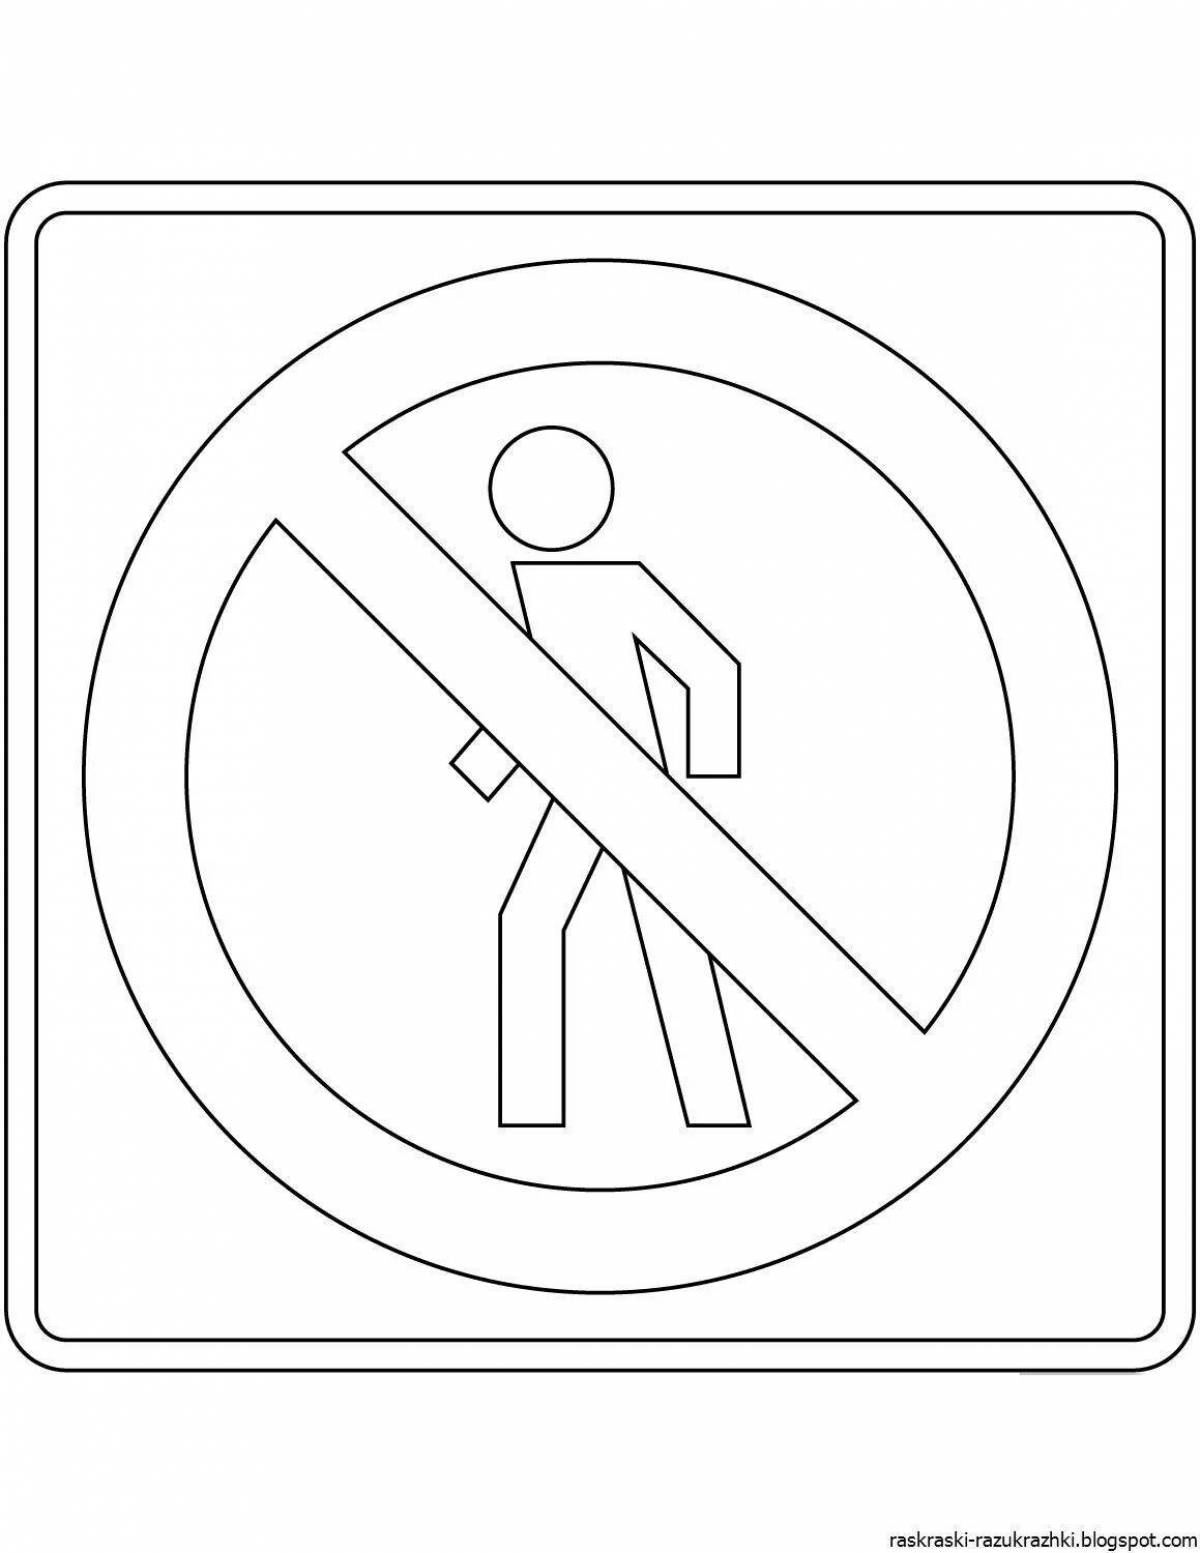 Coloring page glowing pedestrian signs